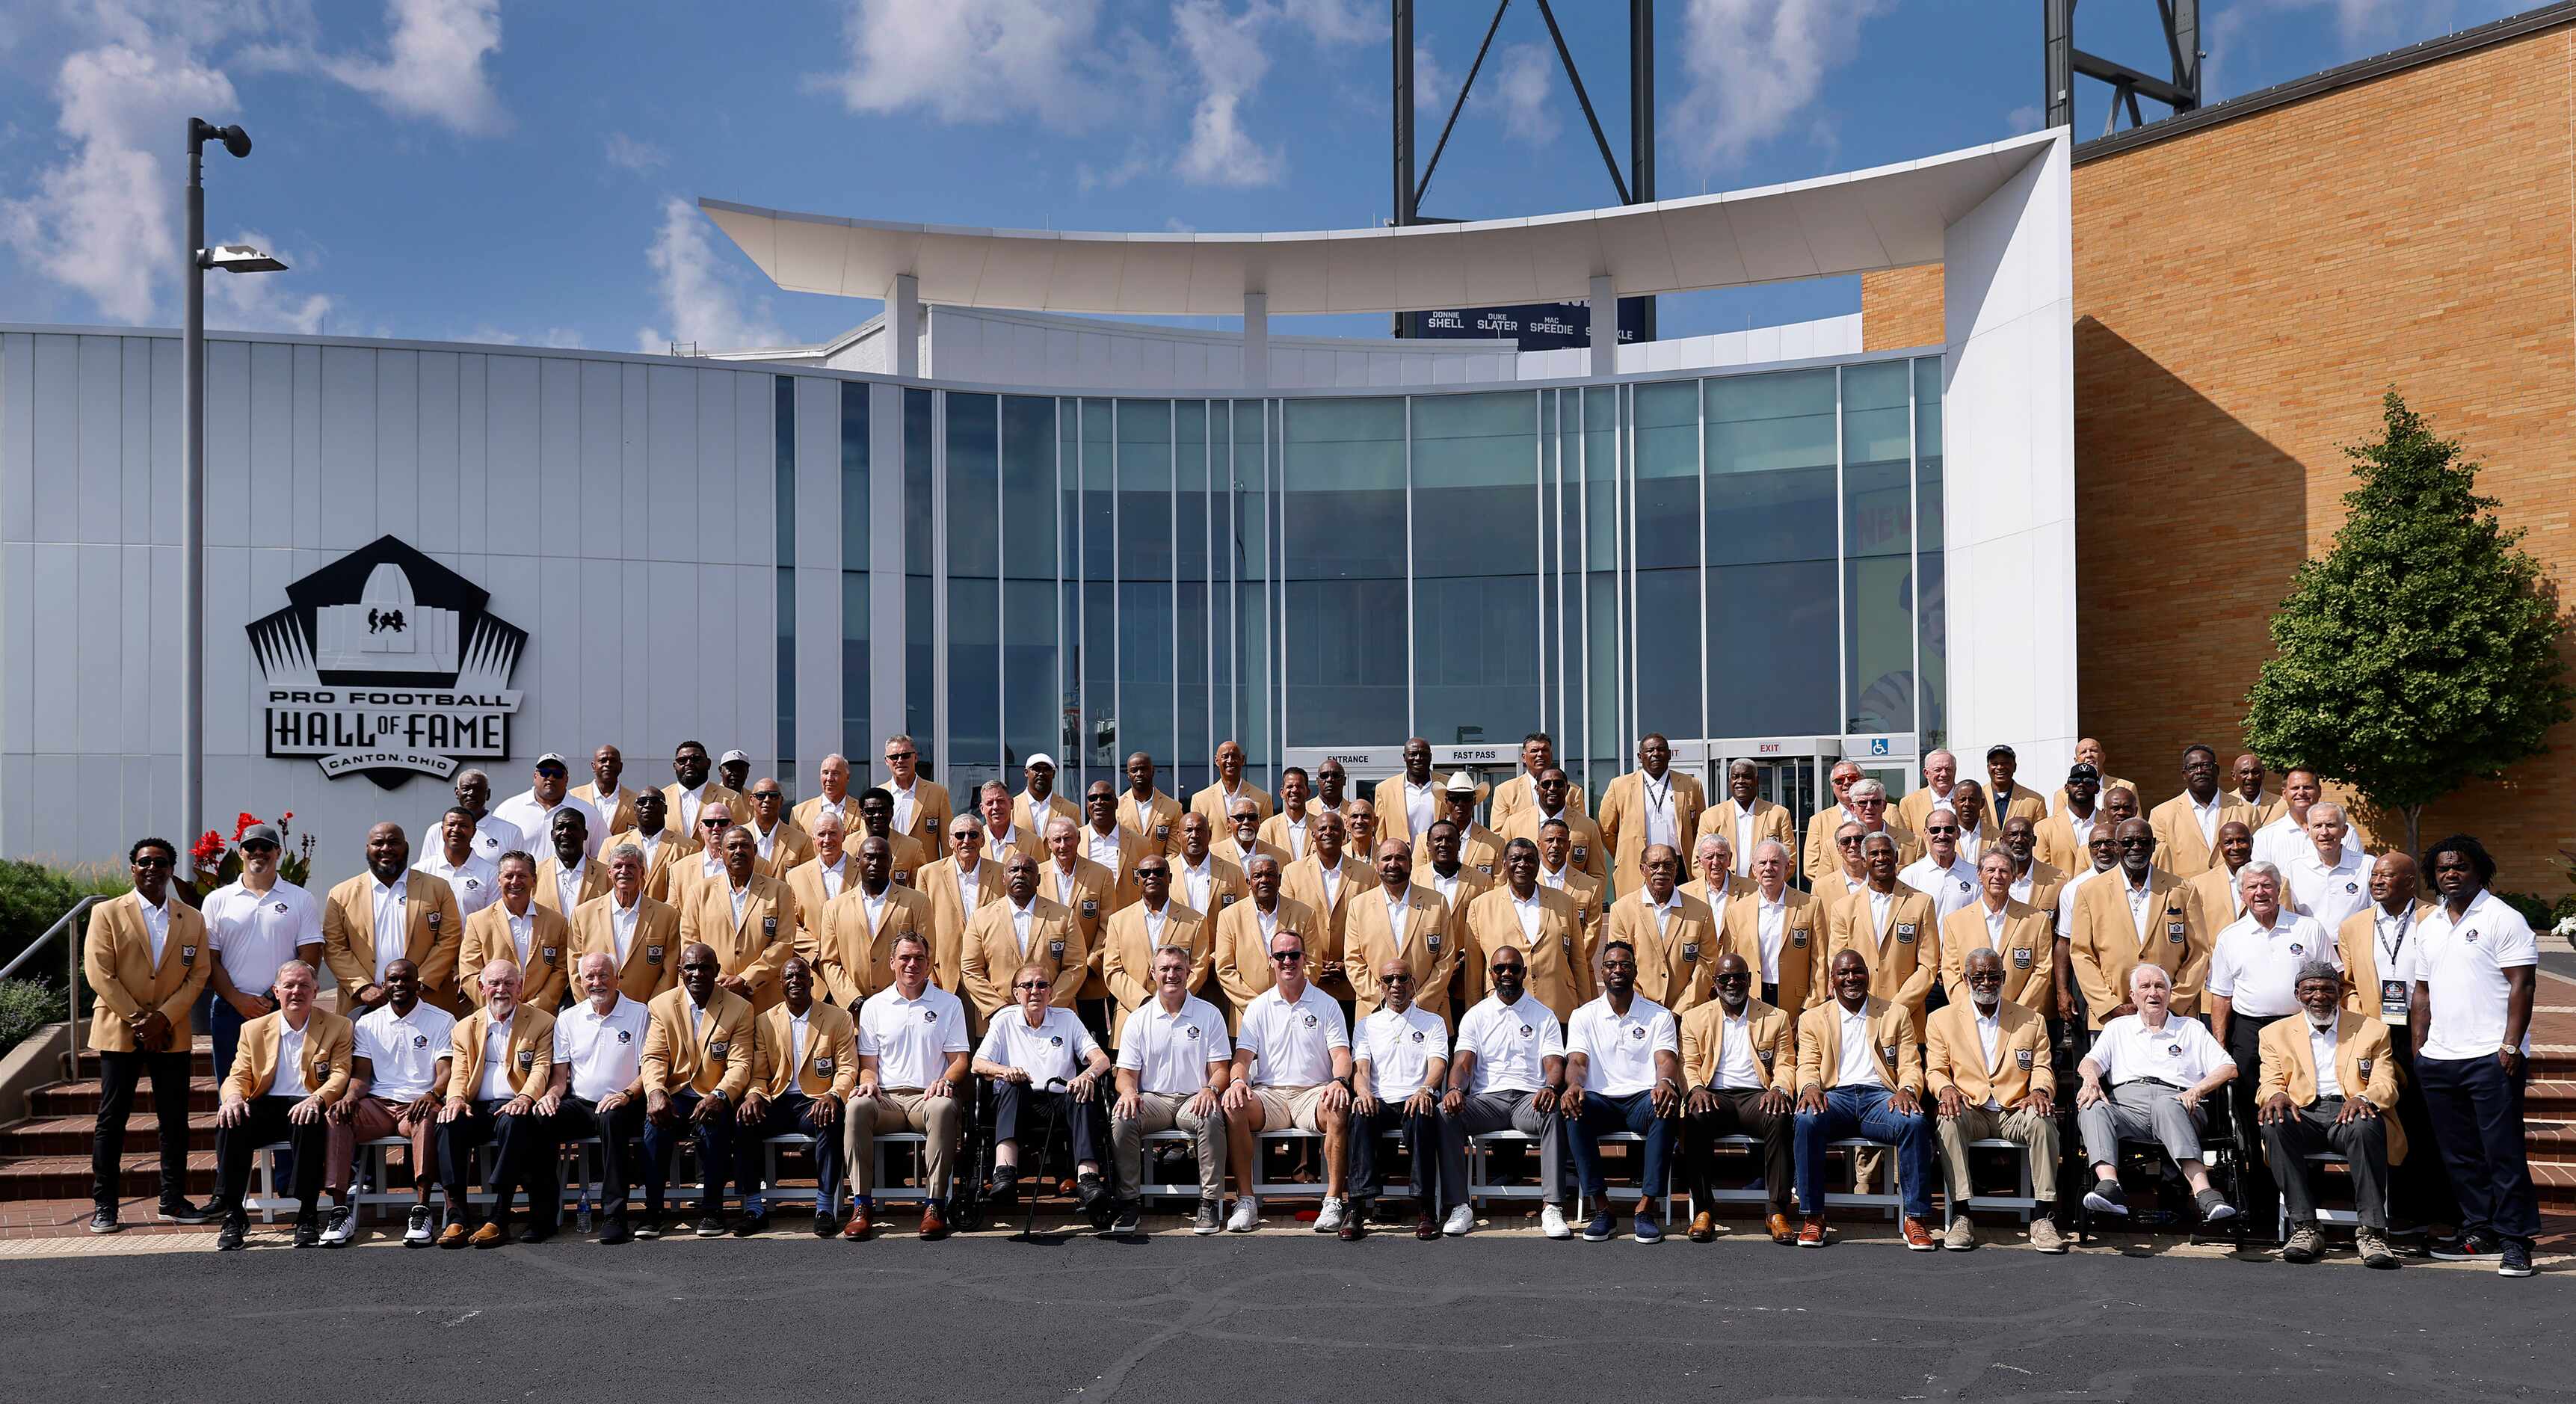 The Pro Football Hall of Fame inductees of the 2020 and 2021 classes (wearing white shirts)...